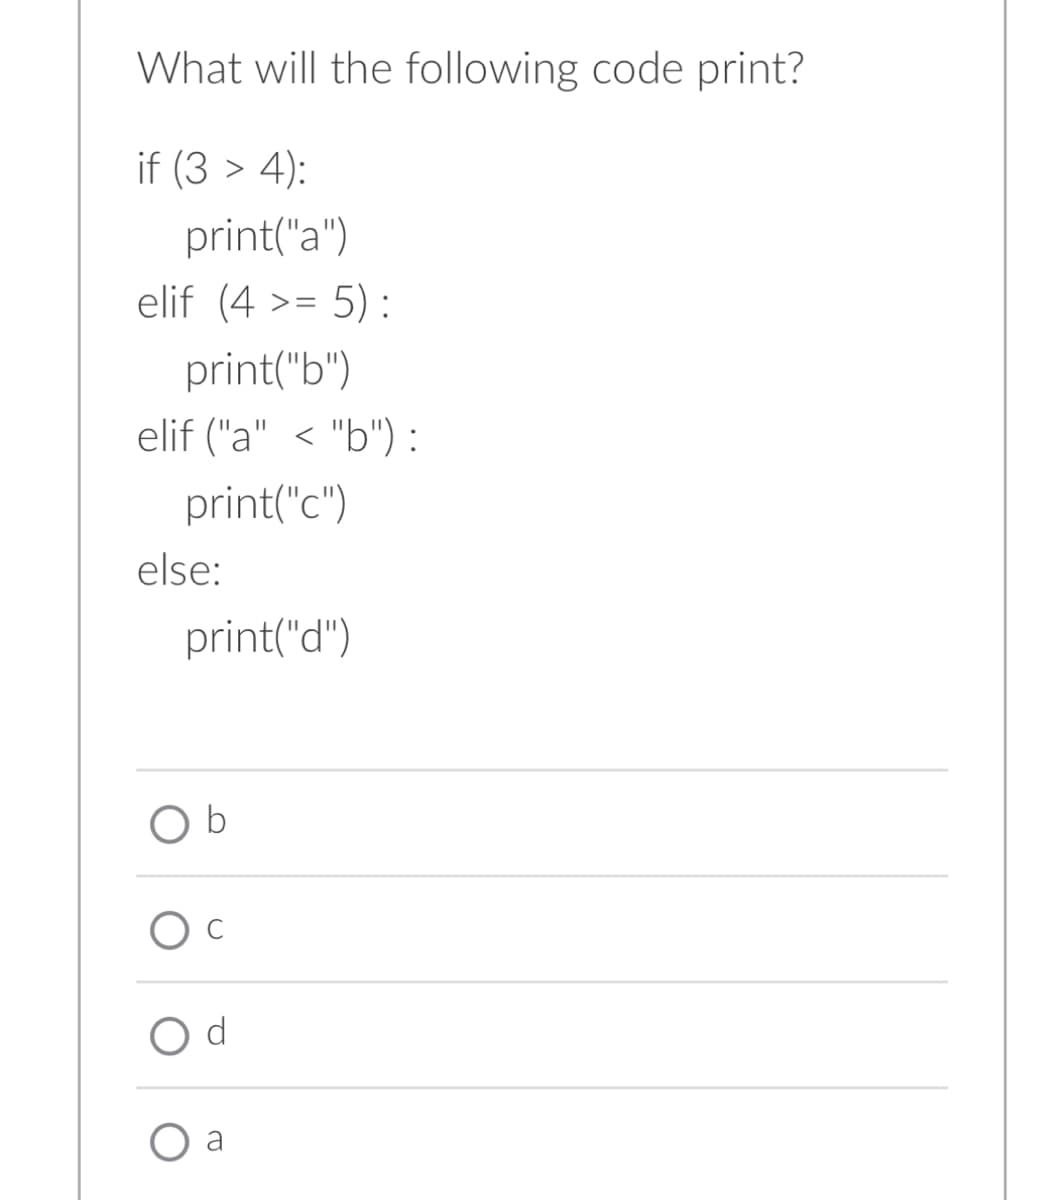 What will the following code print?
if (3 > 4):
print("a")
elif (4>= 5):
print("b")
elif ("a" < "b") :
print("c")
else:
print("d")
O b
O d
CO